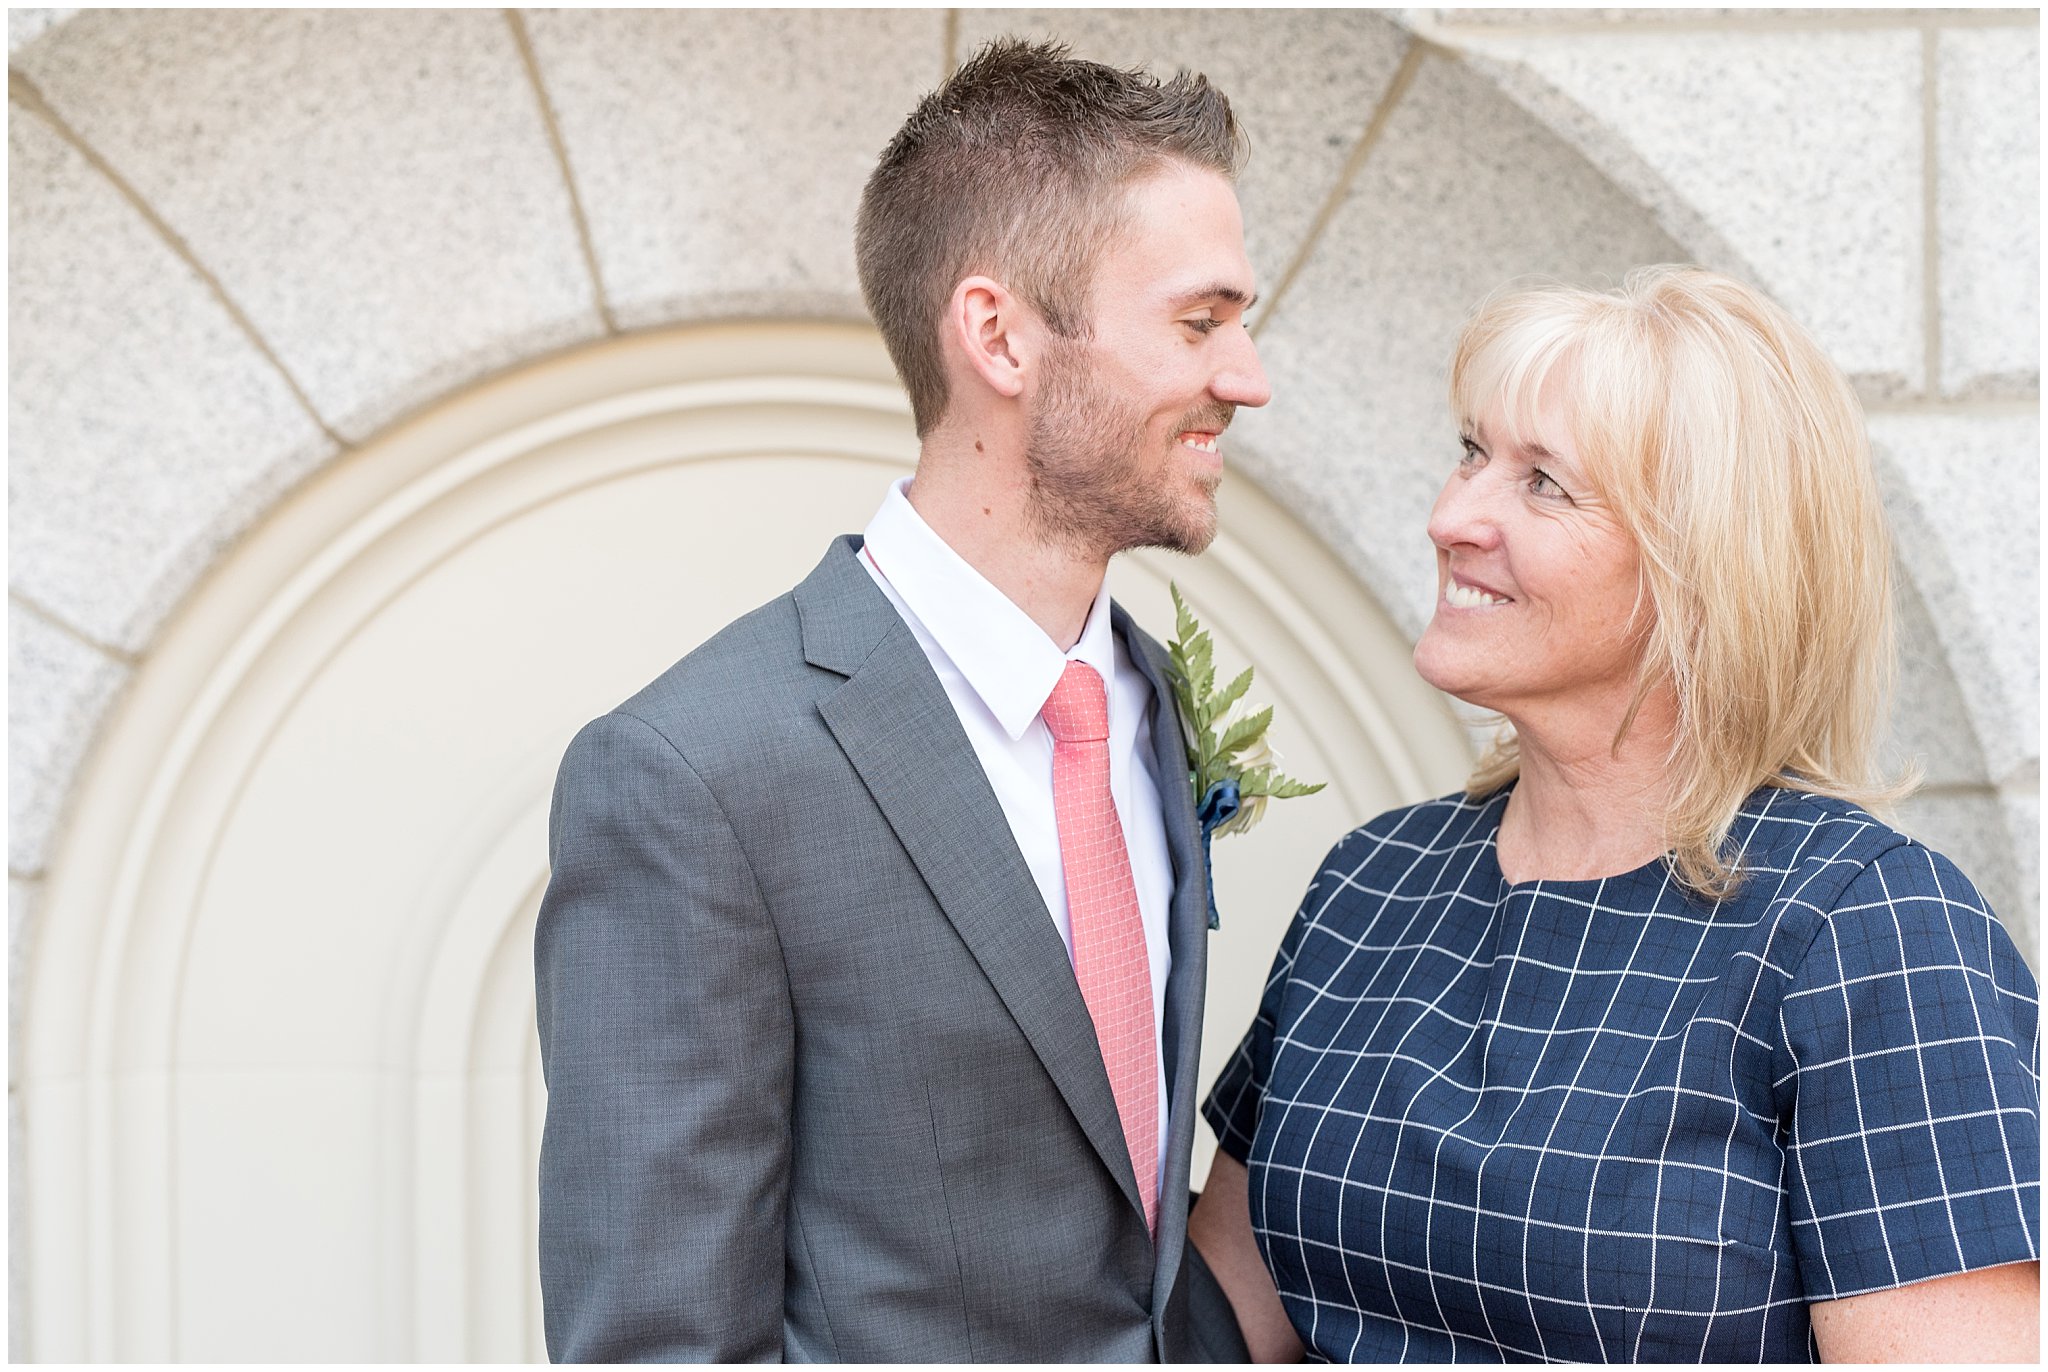 Salt Lake Temple family pictures | Coral and grey spring wedding